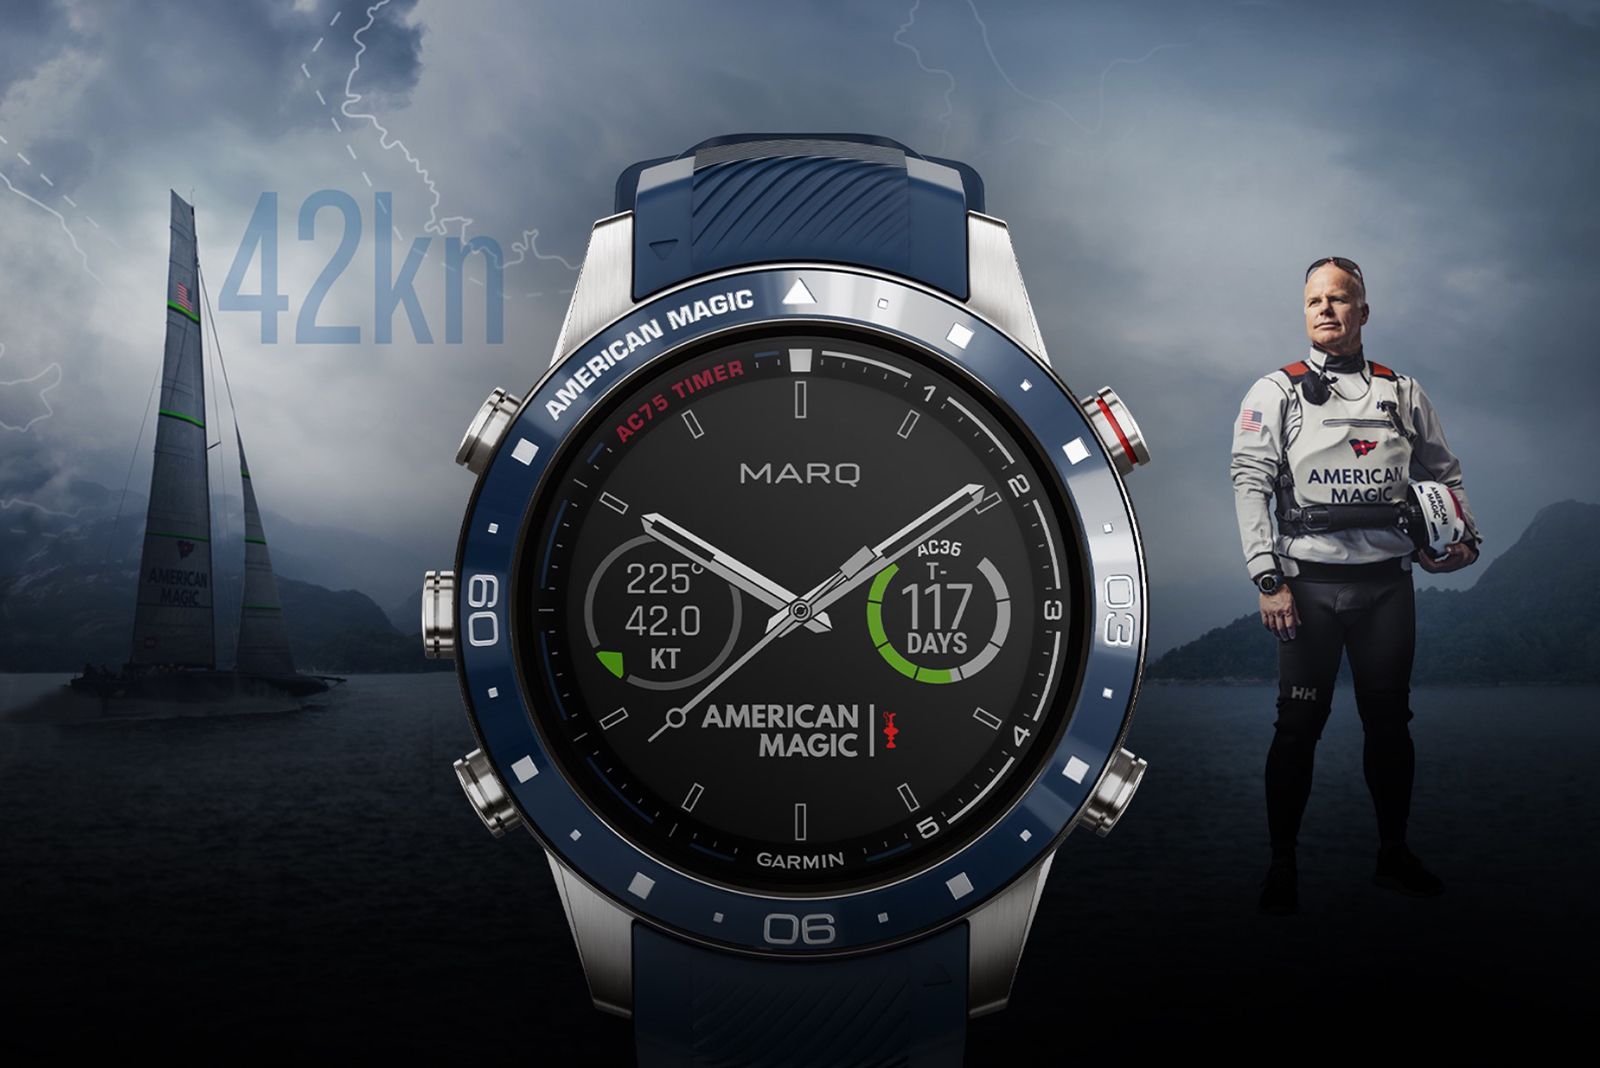 Garmin made a MARQ Captain luxury sailing watch with the American Magic team image 1